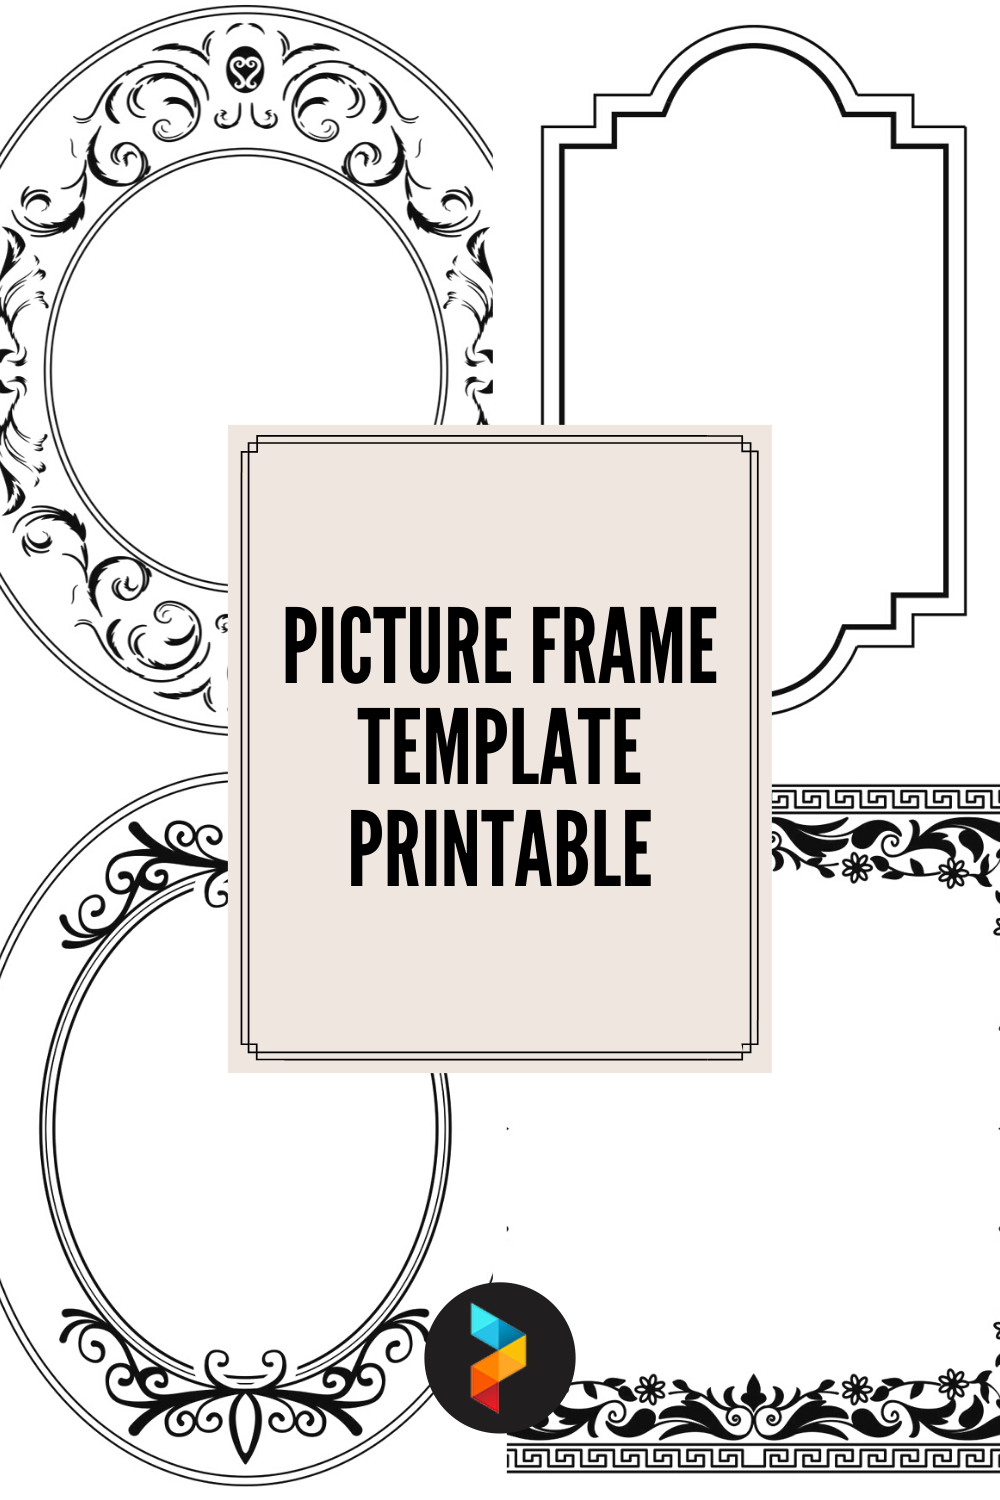 Free Word Frame Templates Free Certificate Borders To Download Download Frame Word Templates